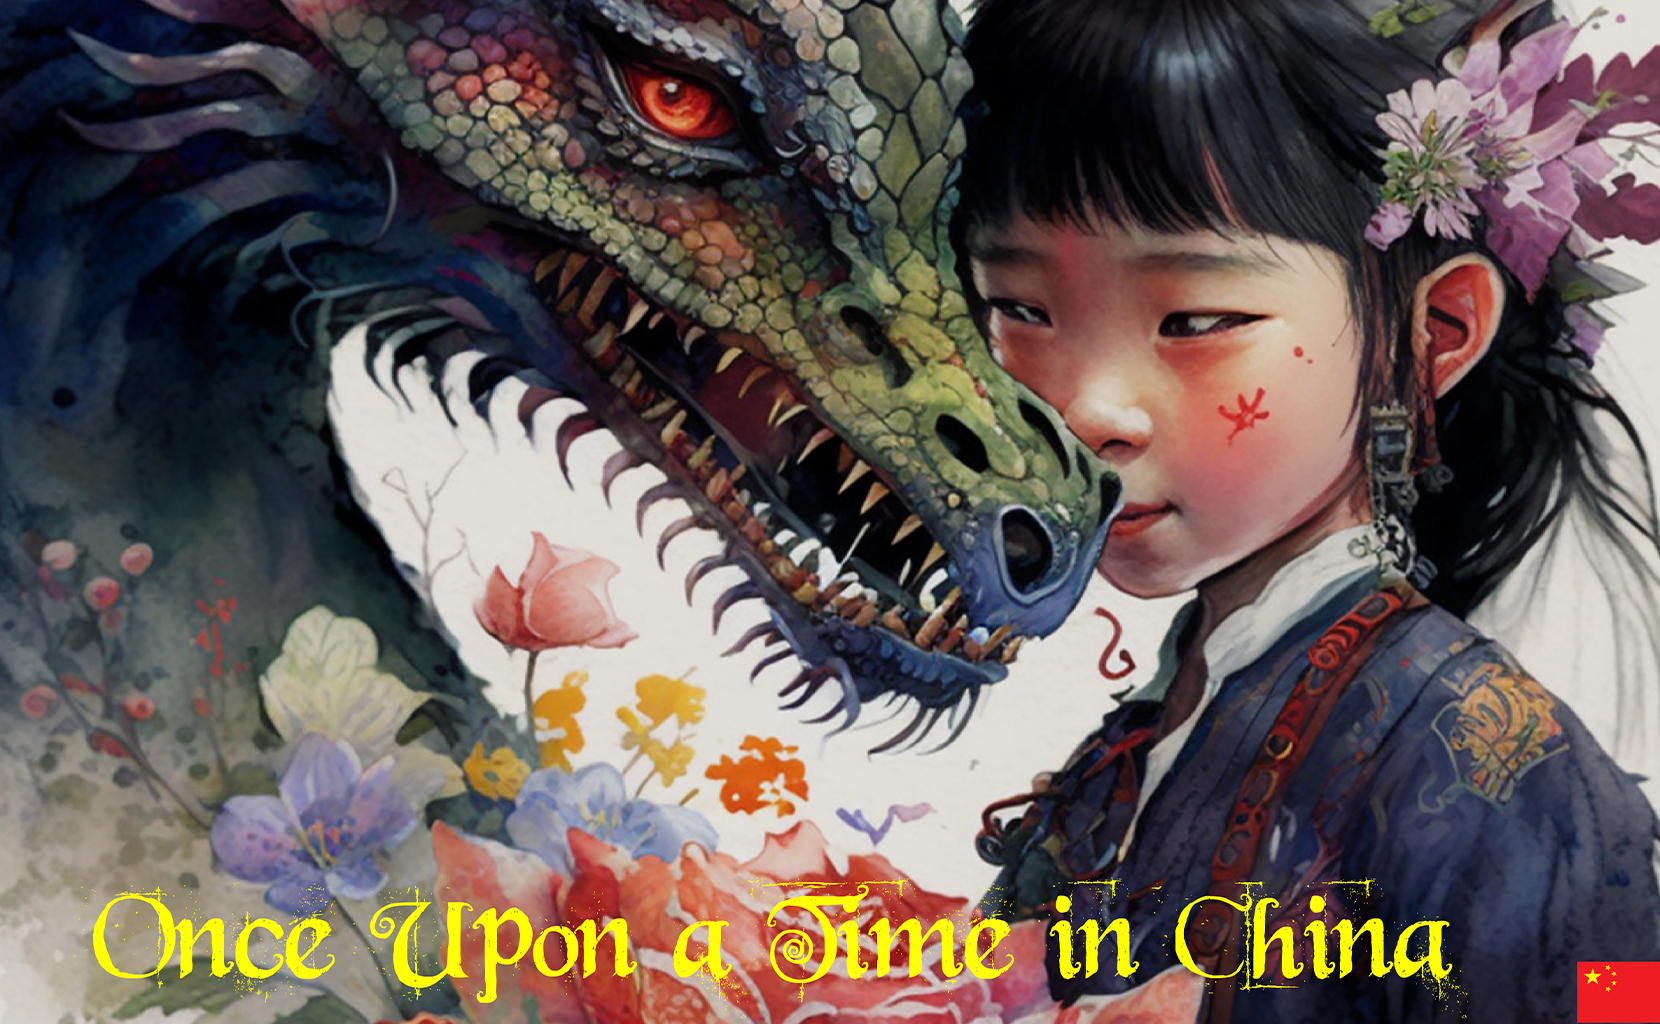 Fairy tale, tales, fantasy, children book, kids stories, story from china, asia child books, chinese kids story, fairy tale book, kids fiction book, story from china, dragon in china